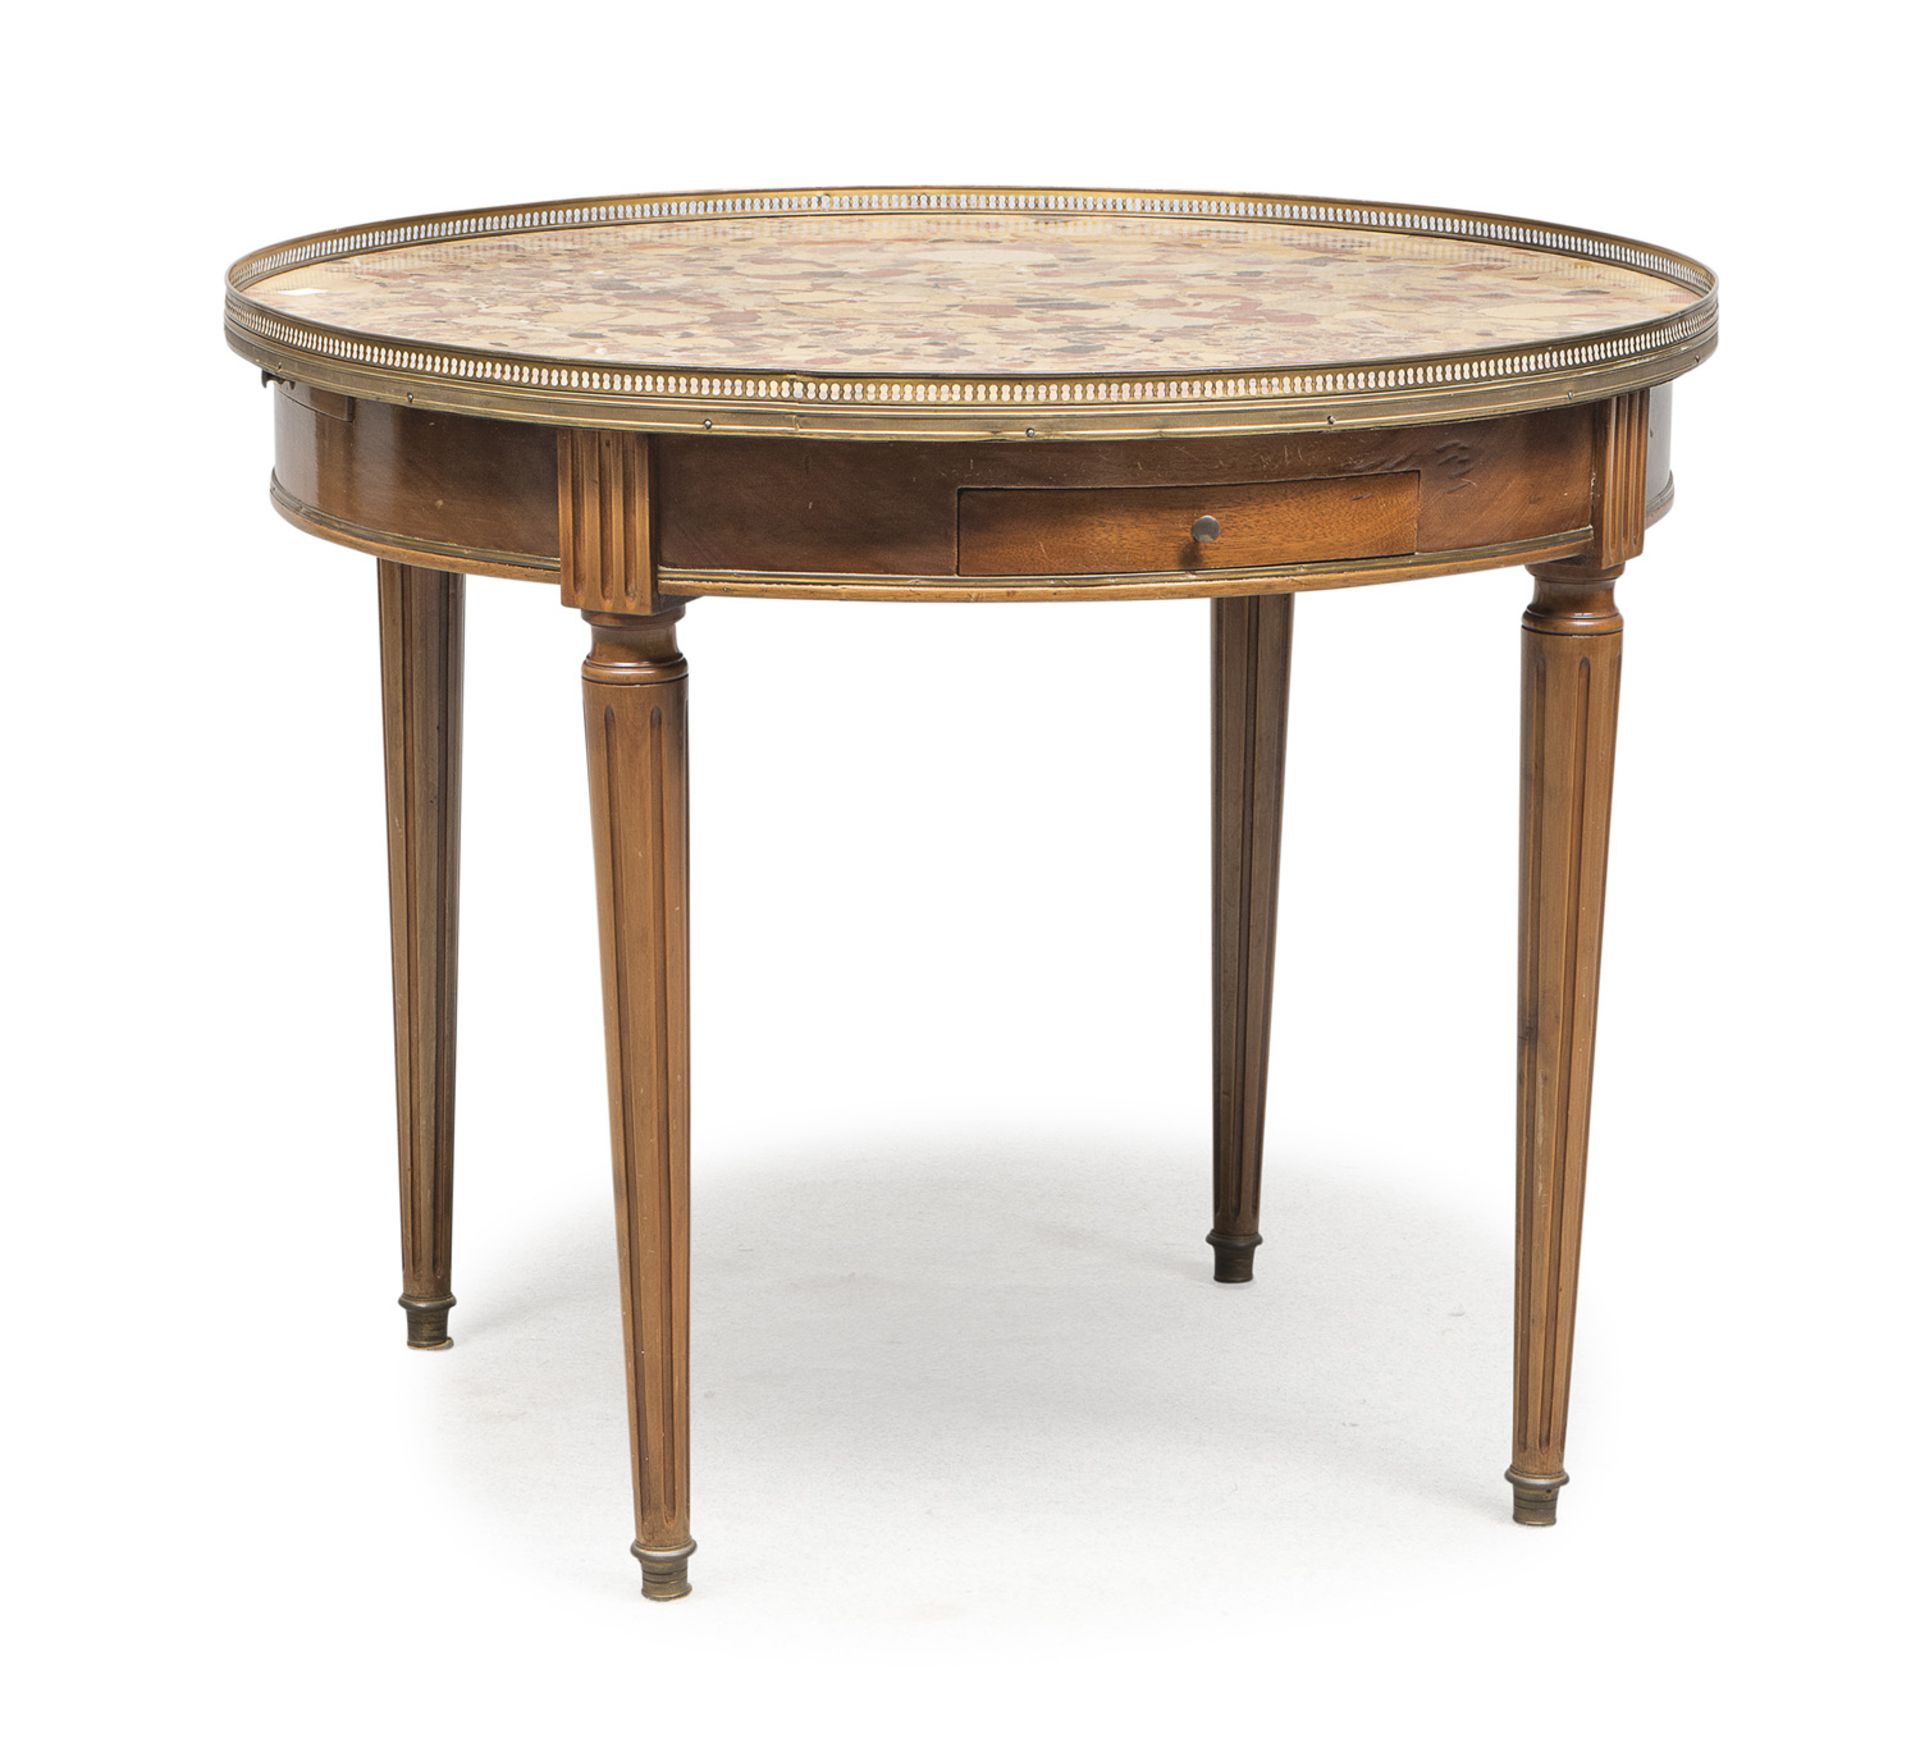 ROUND TABOURET TABLE FRANCE 19TH CENTURY